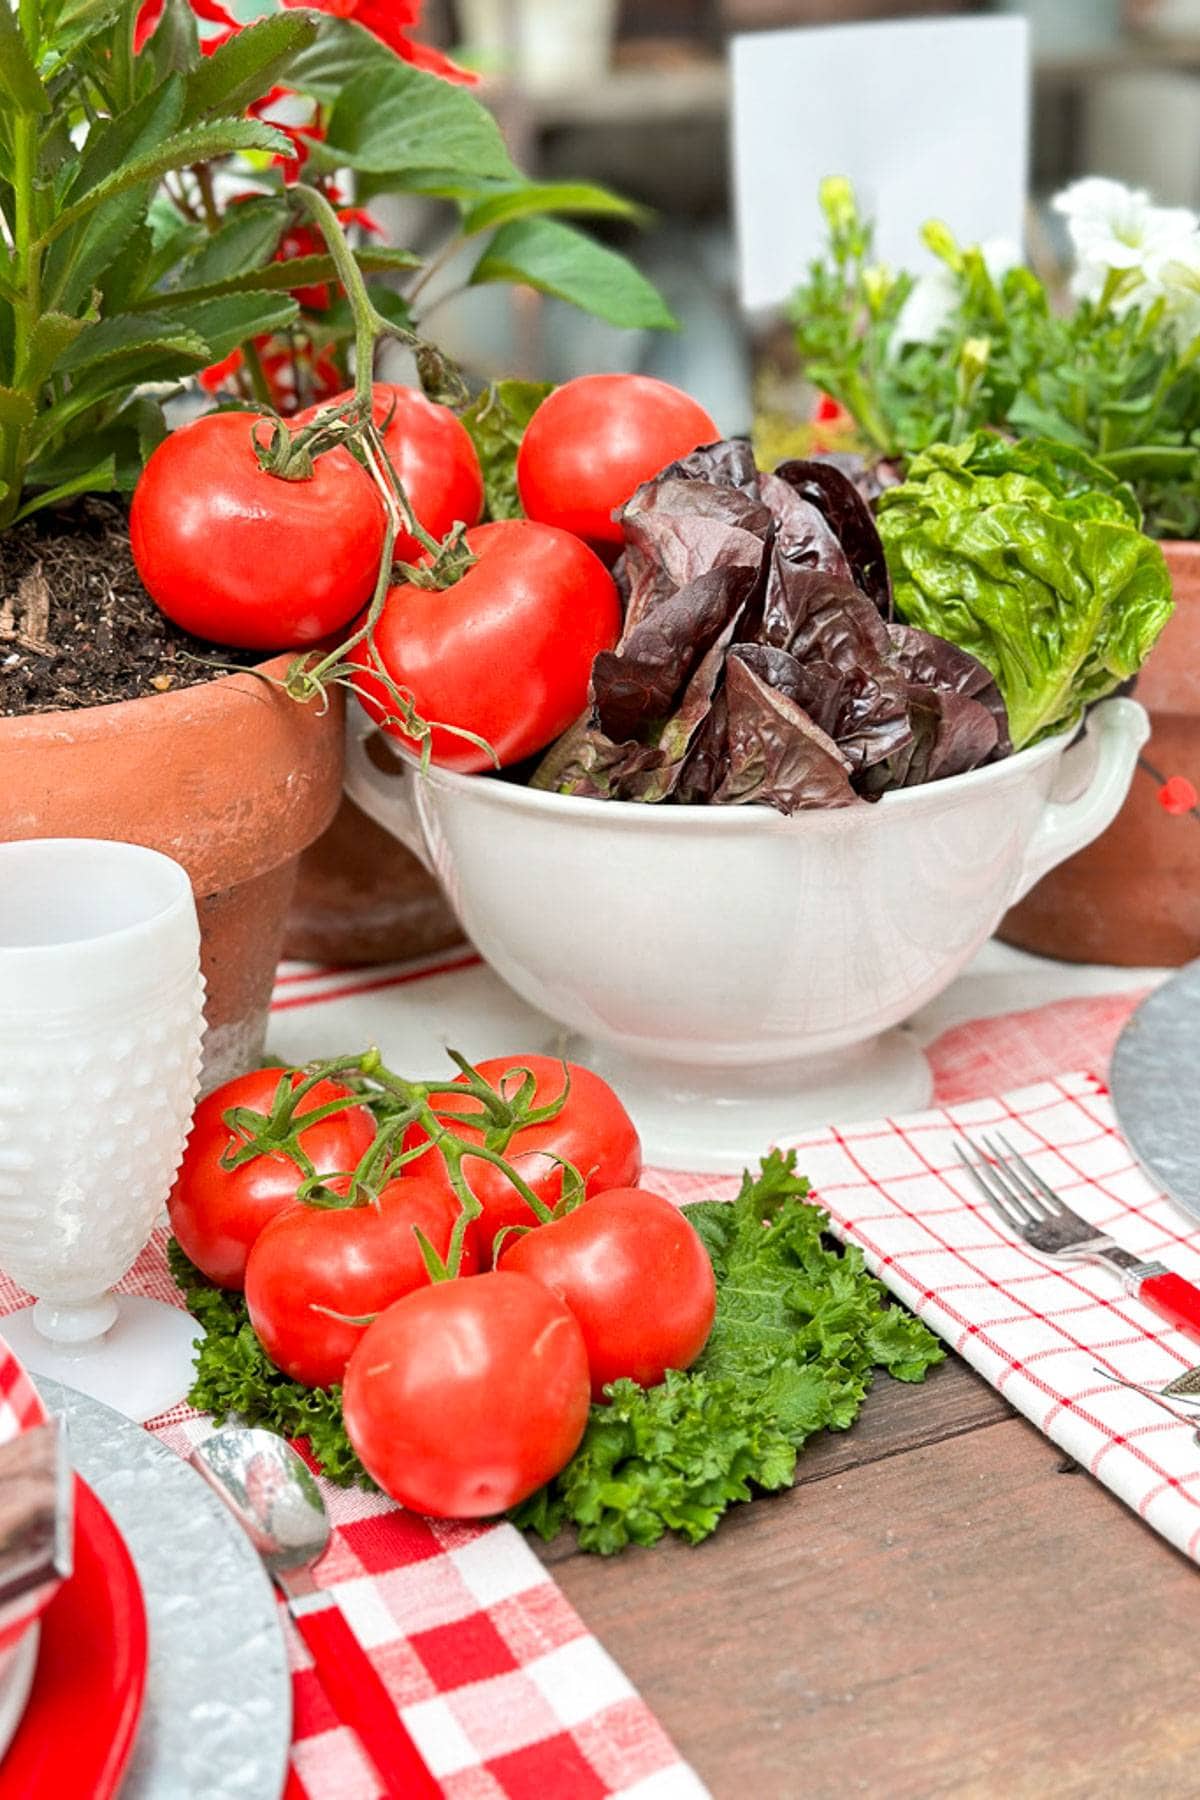 A bowl of lettuce and tomatoes decorate the table in addition to the other centerpiece.